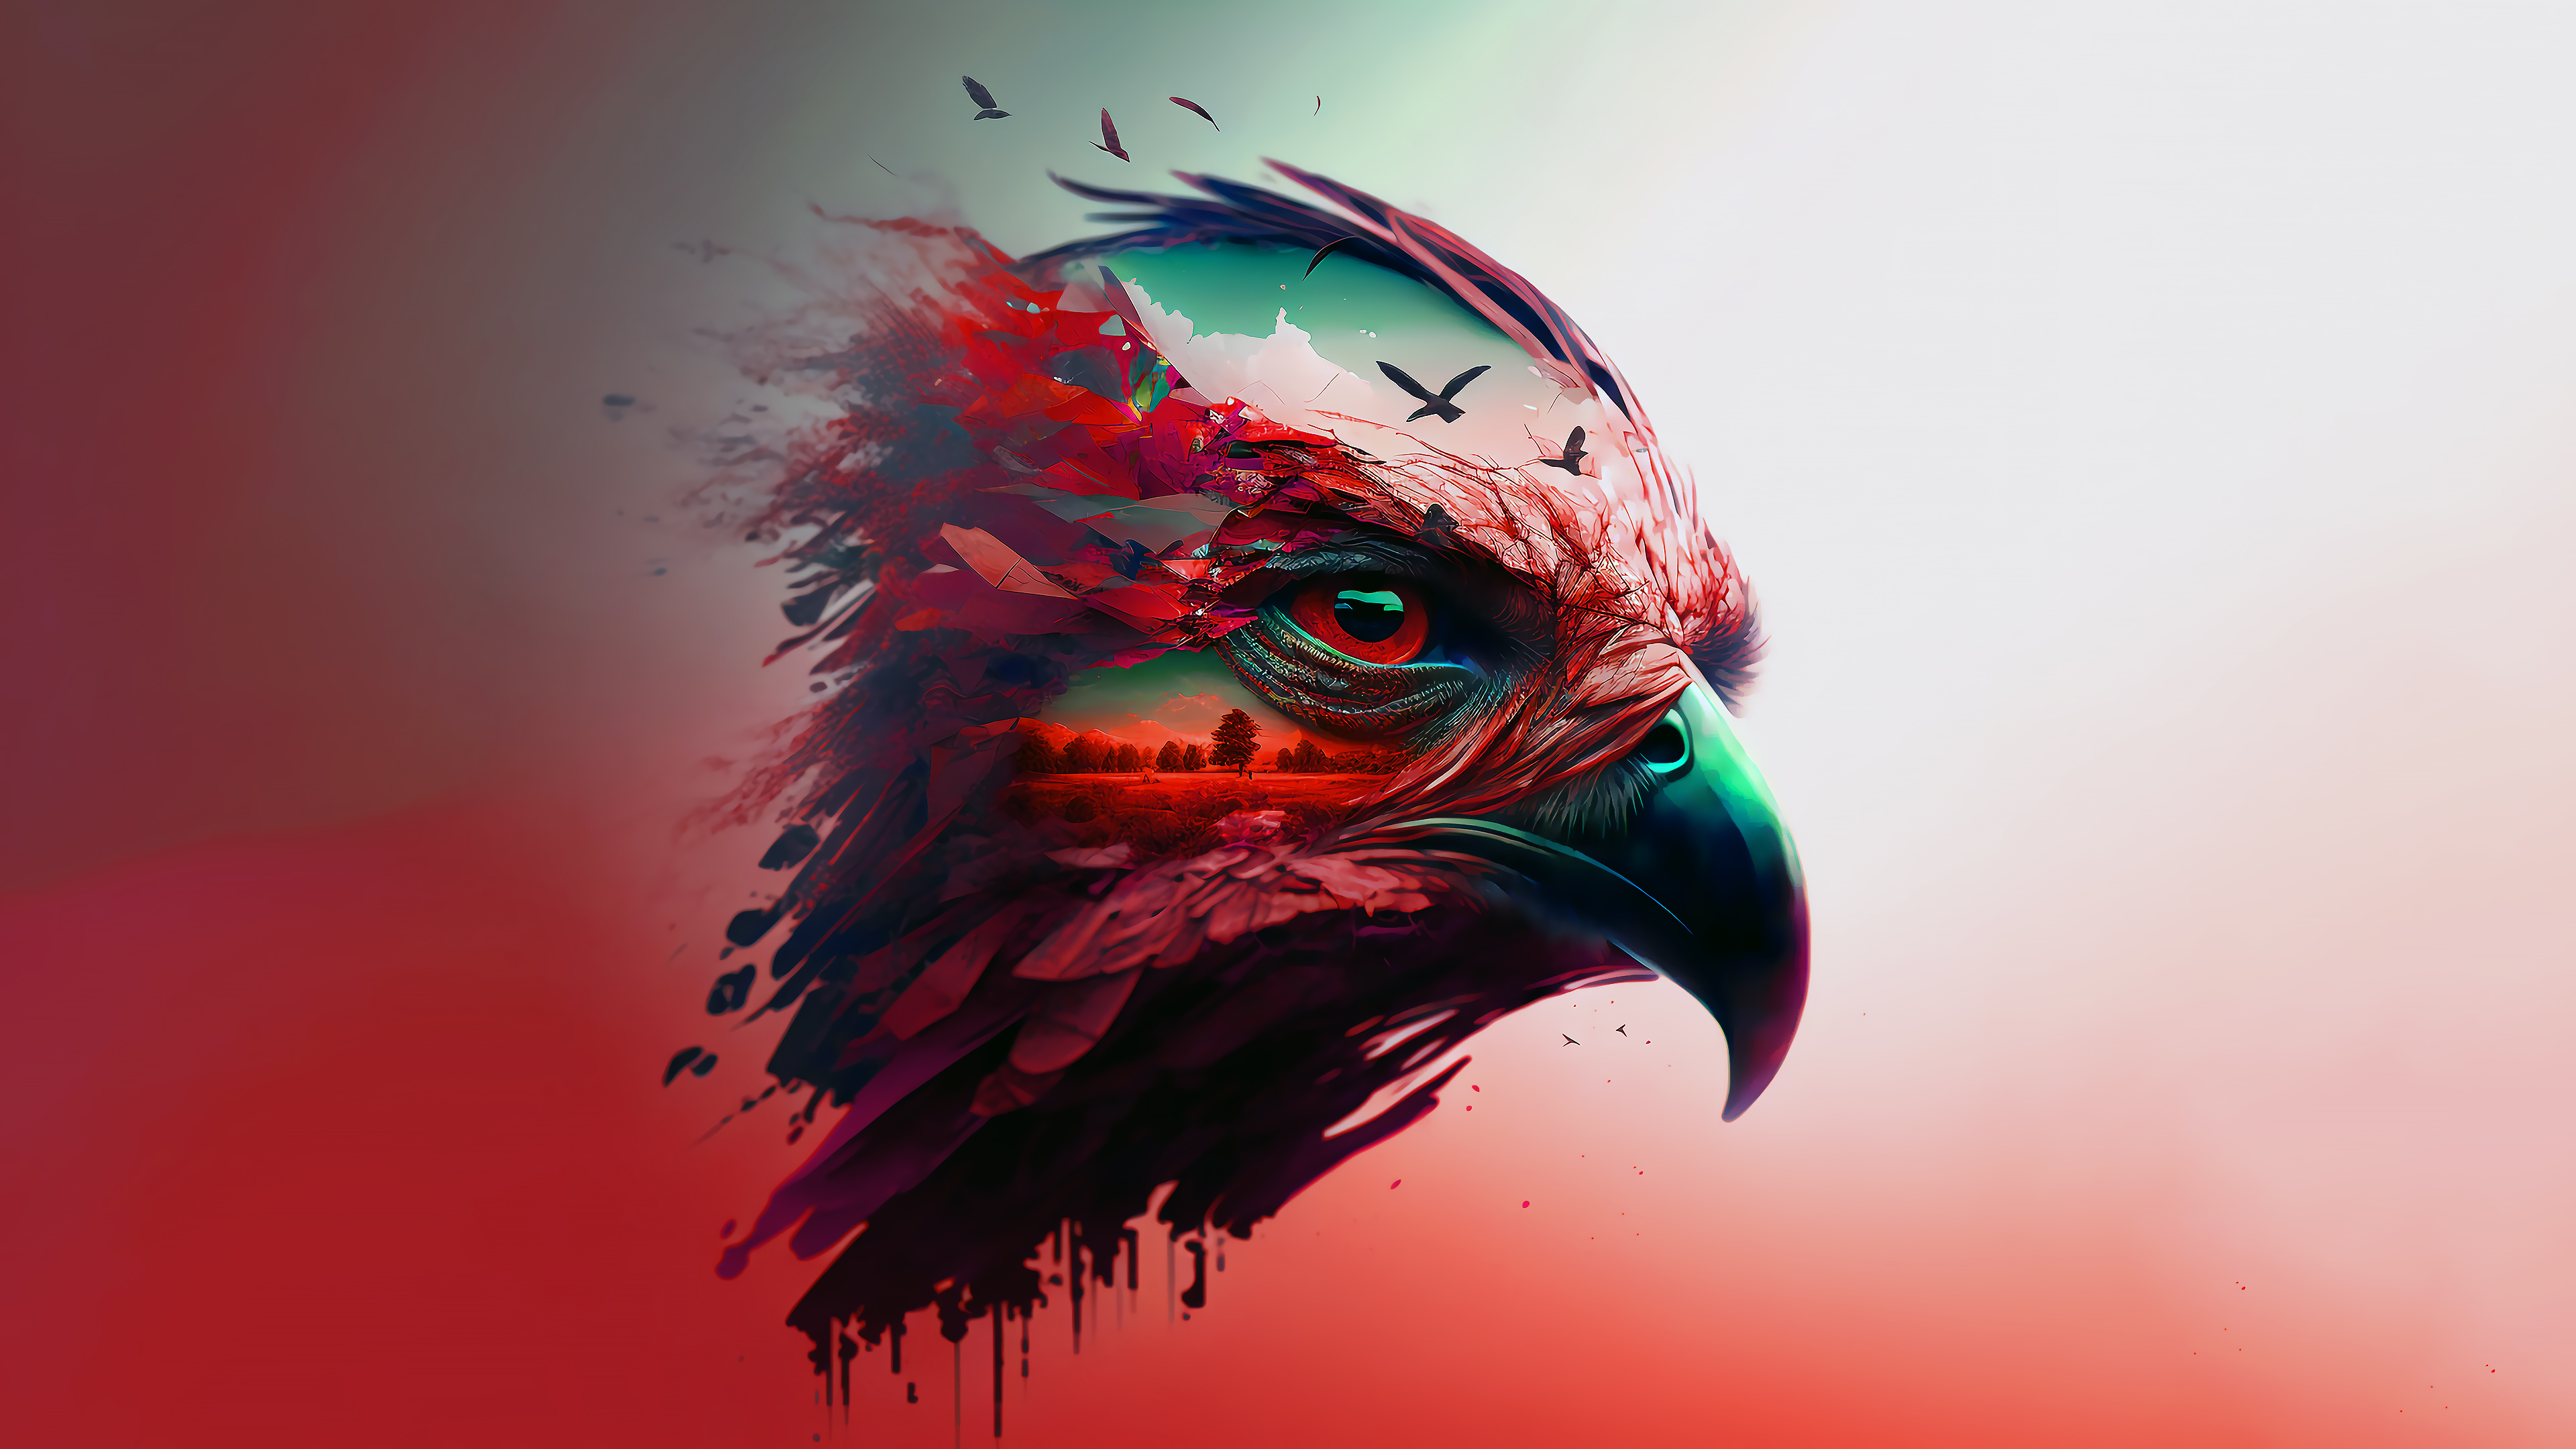 A fantastic eagle head on a red background